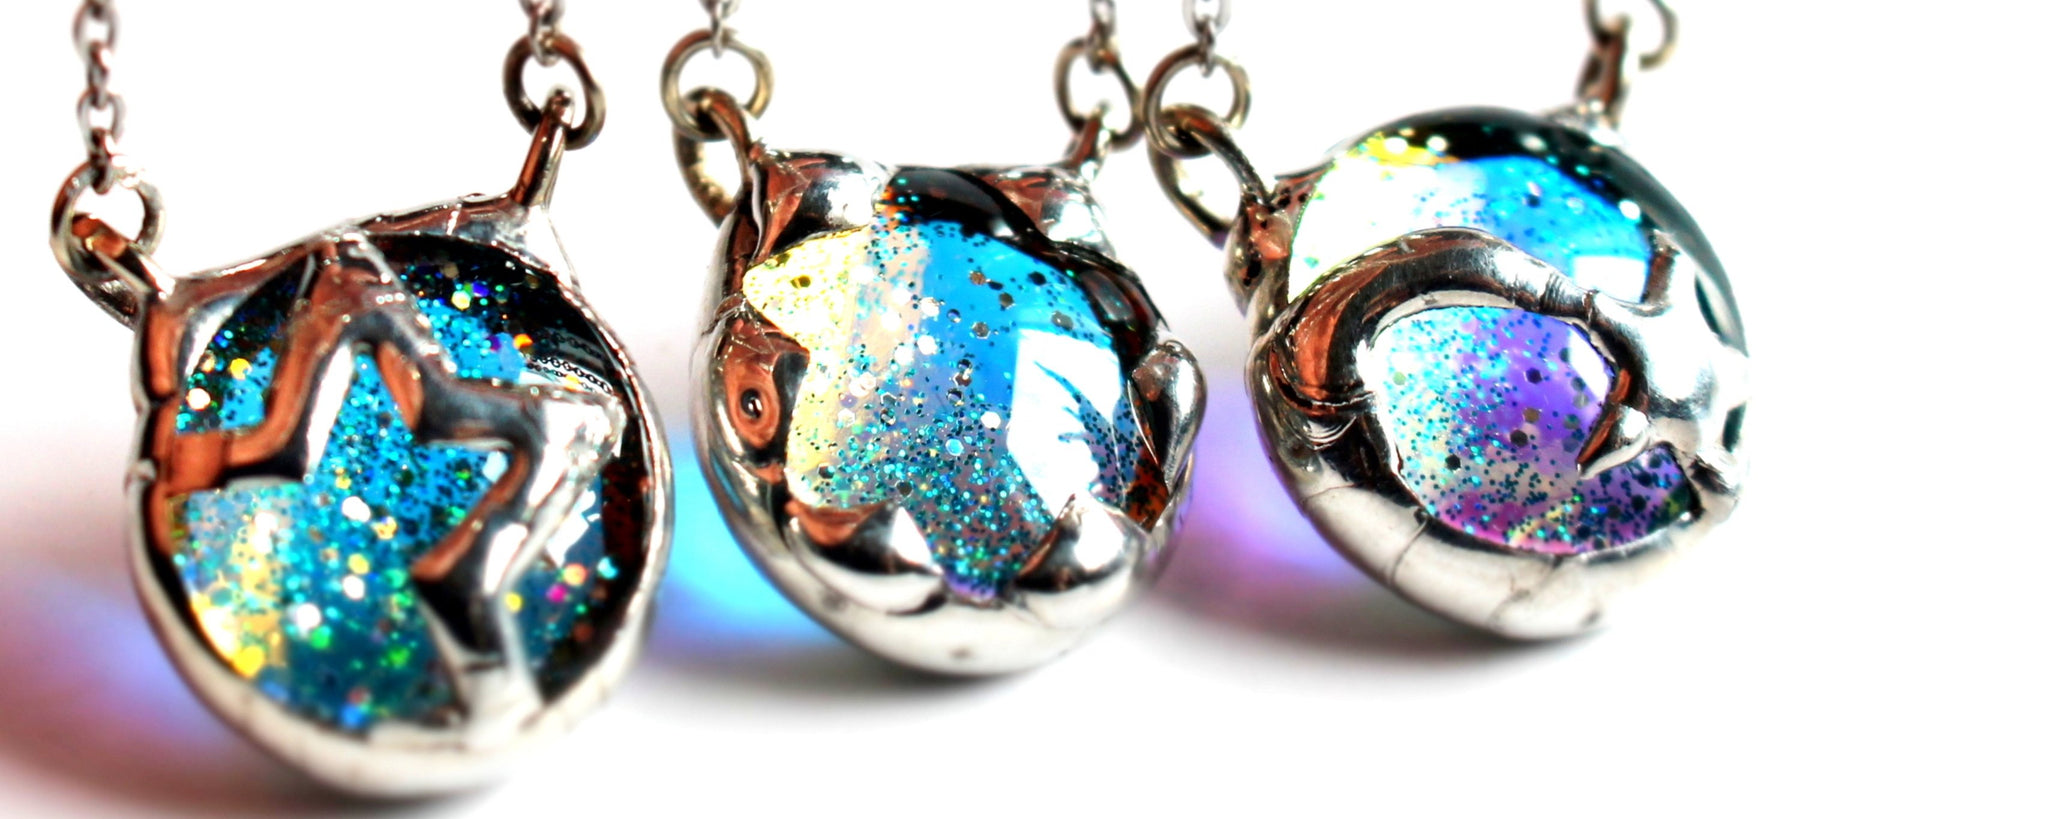 Celestial jewelry in Dichroic glass